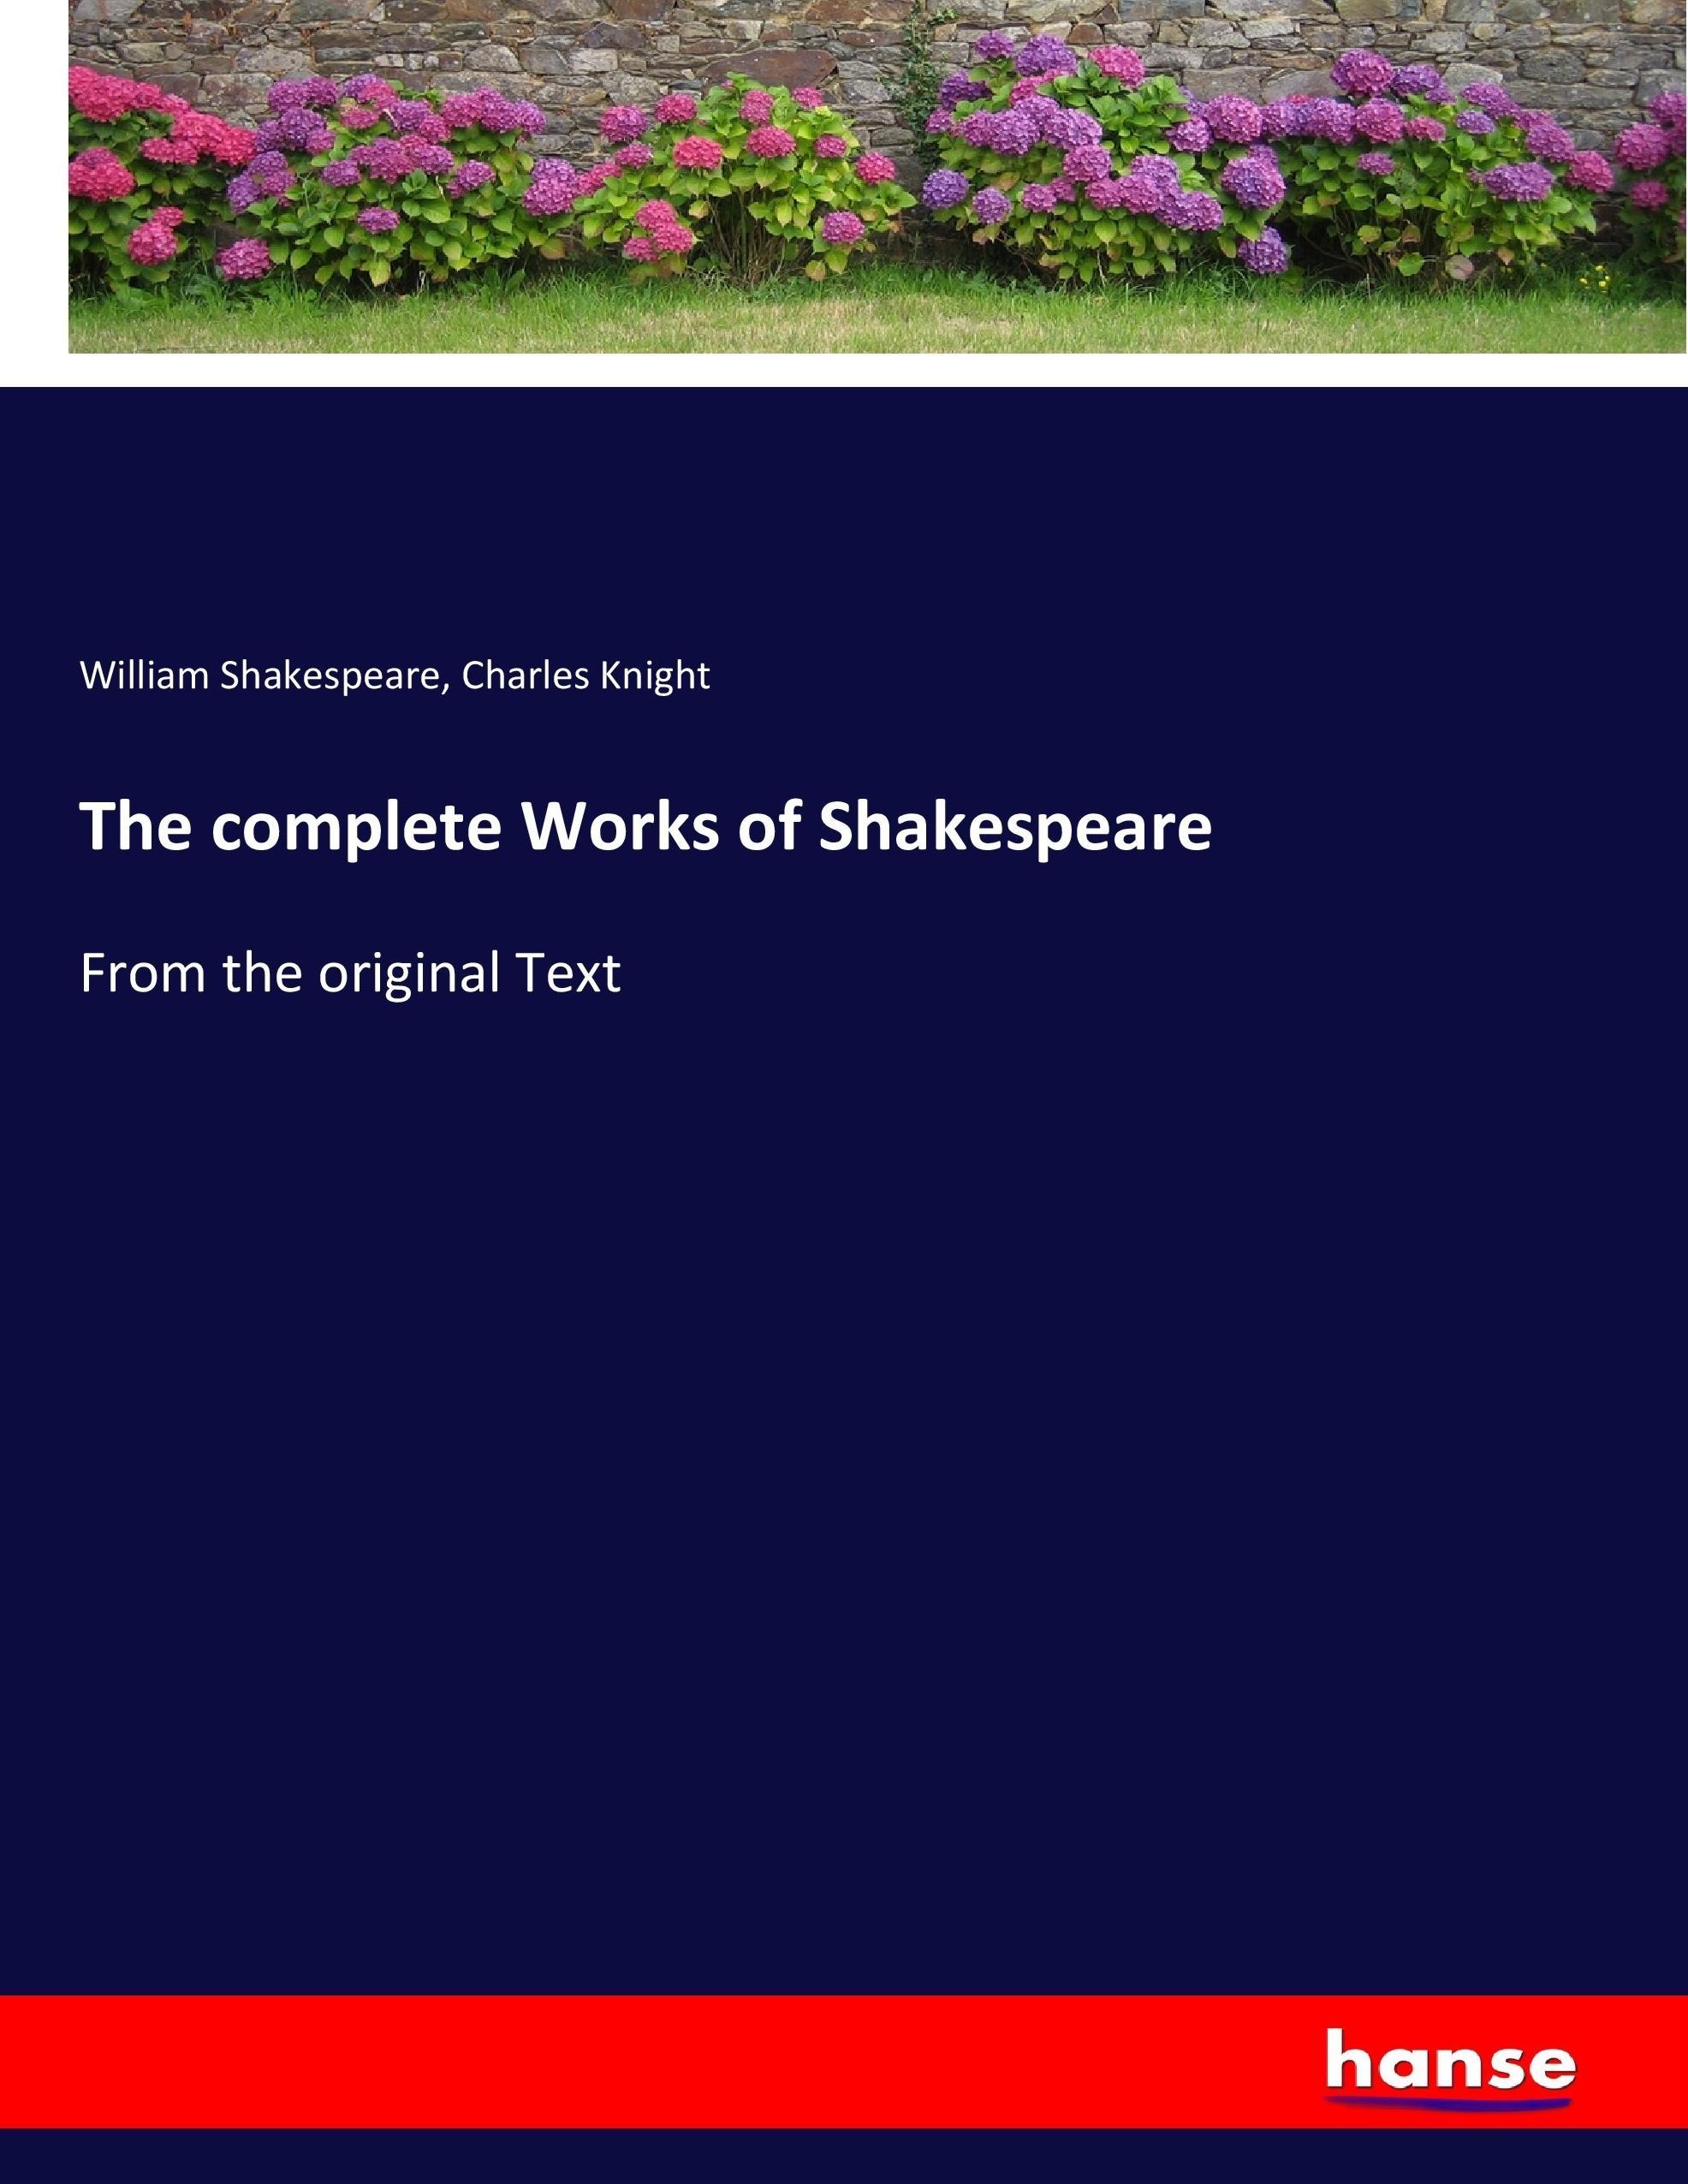 The complete Works of Shakespeare | From the original Text | William Shakespeare (u. a.) | Taschenbuch | Paperback | 668 S. | Englisch | 2017 | hansebooks | EAN 9783337064051 - Shakespeare, William